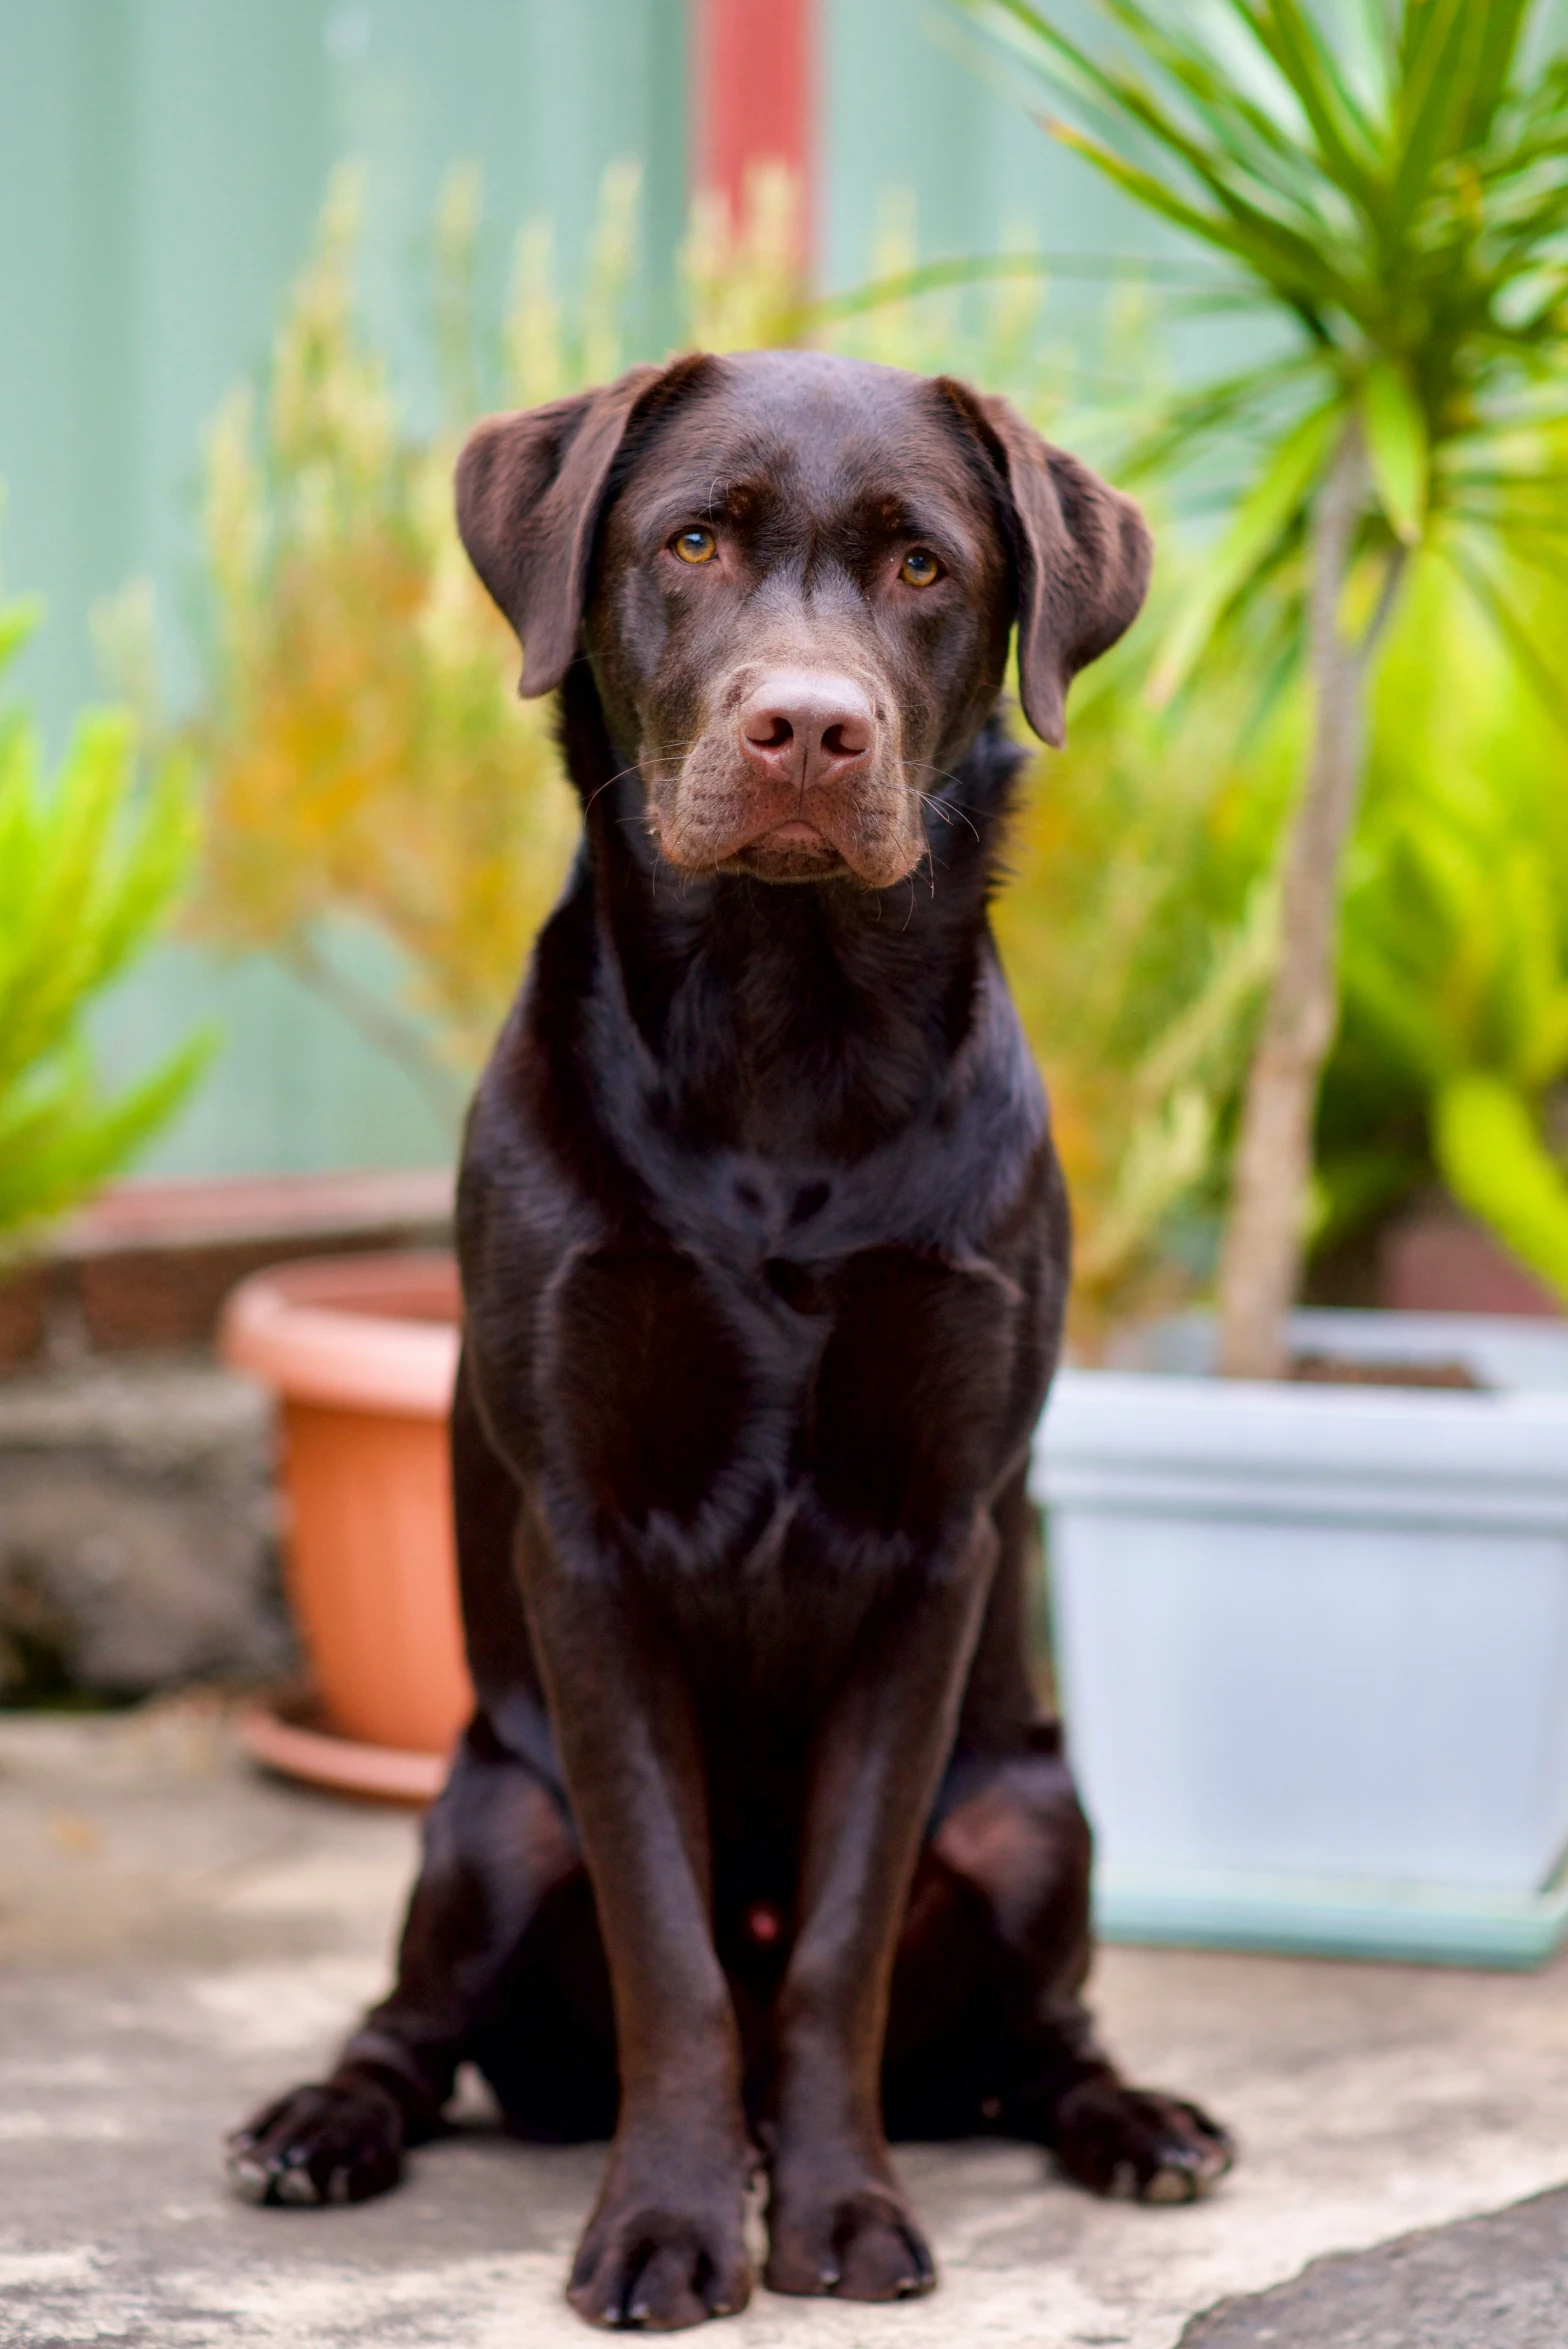 a black dog sits on the ground near potted plants